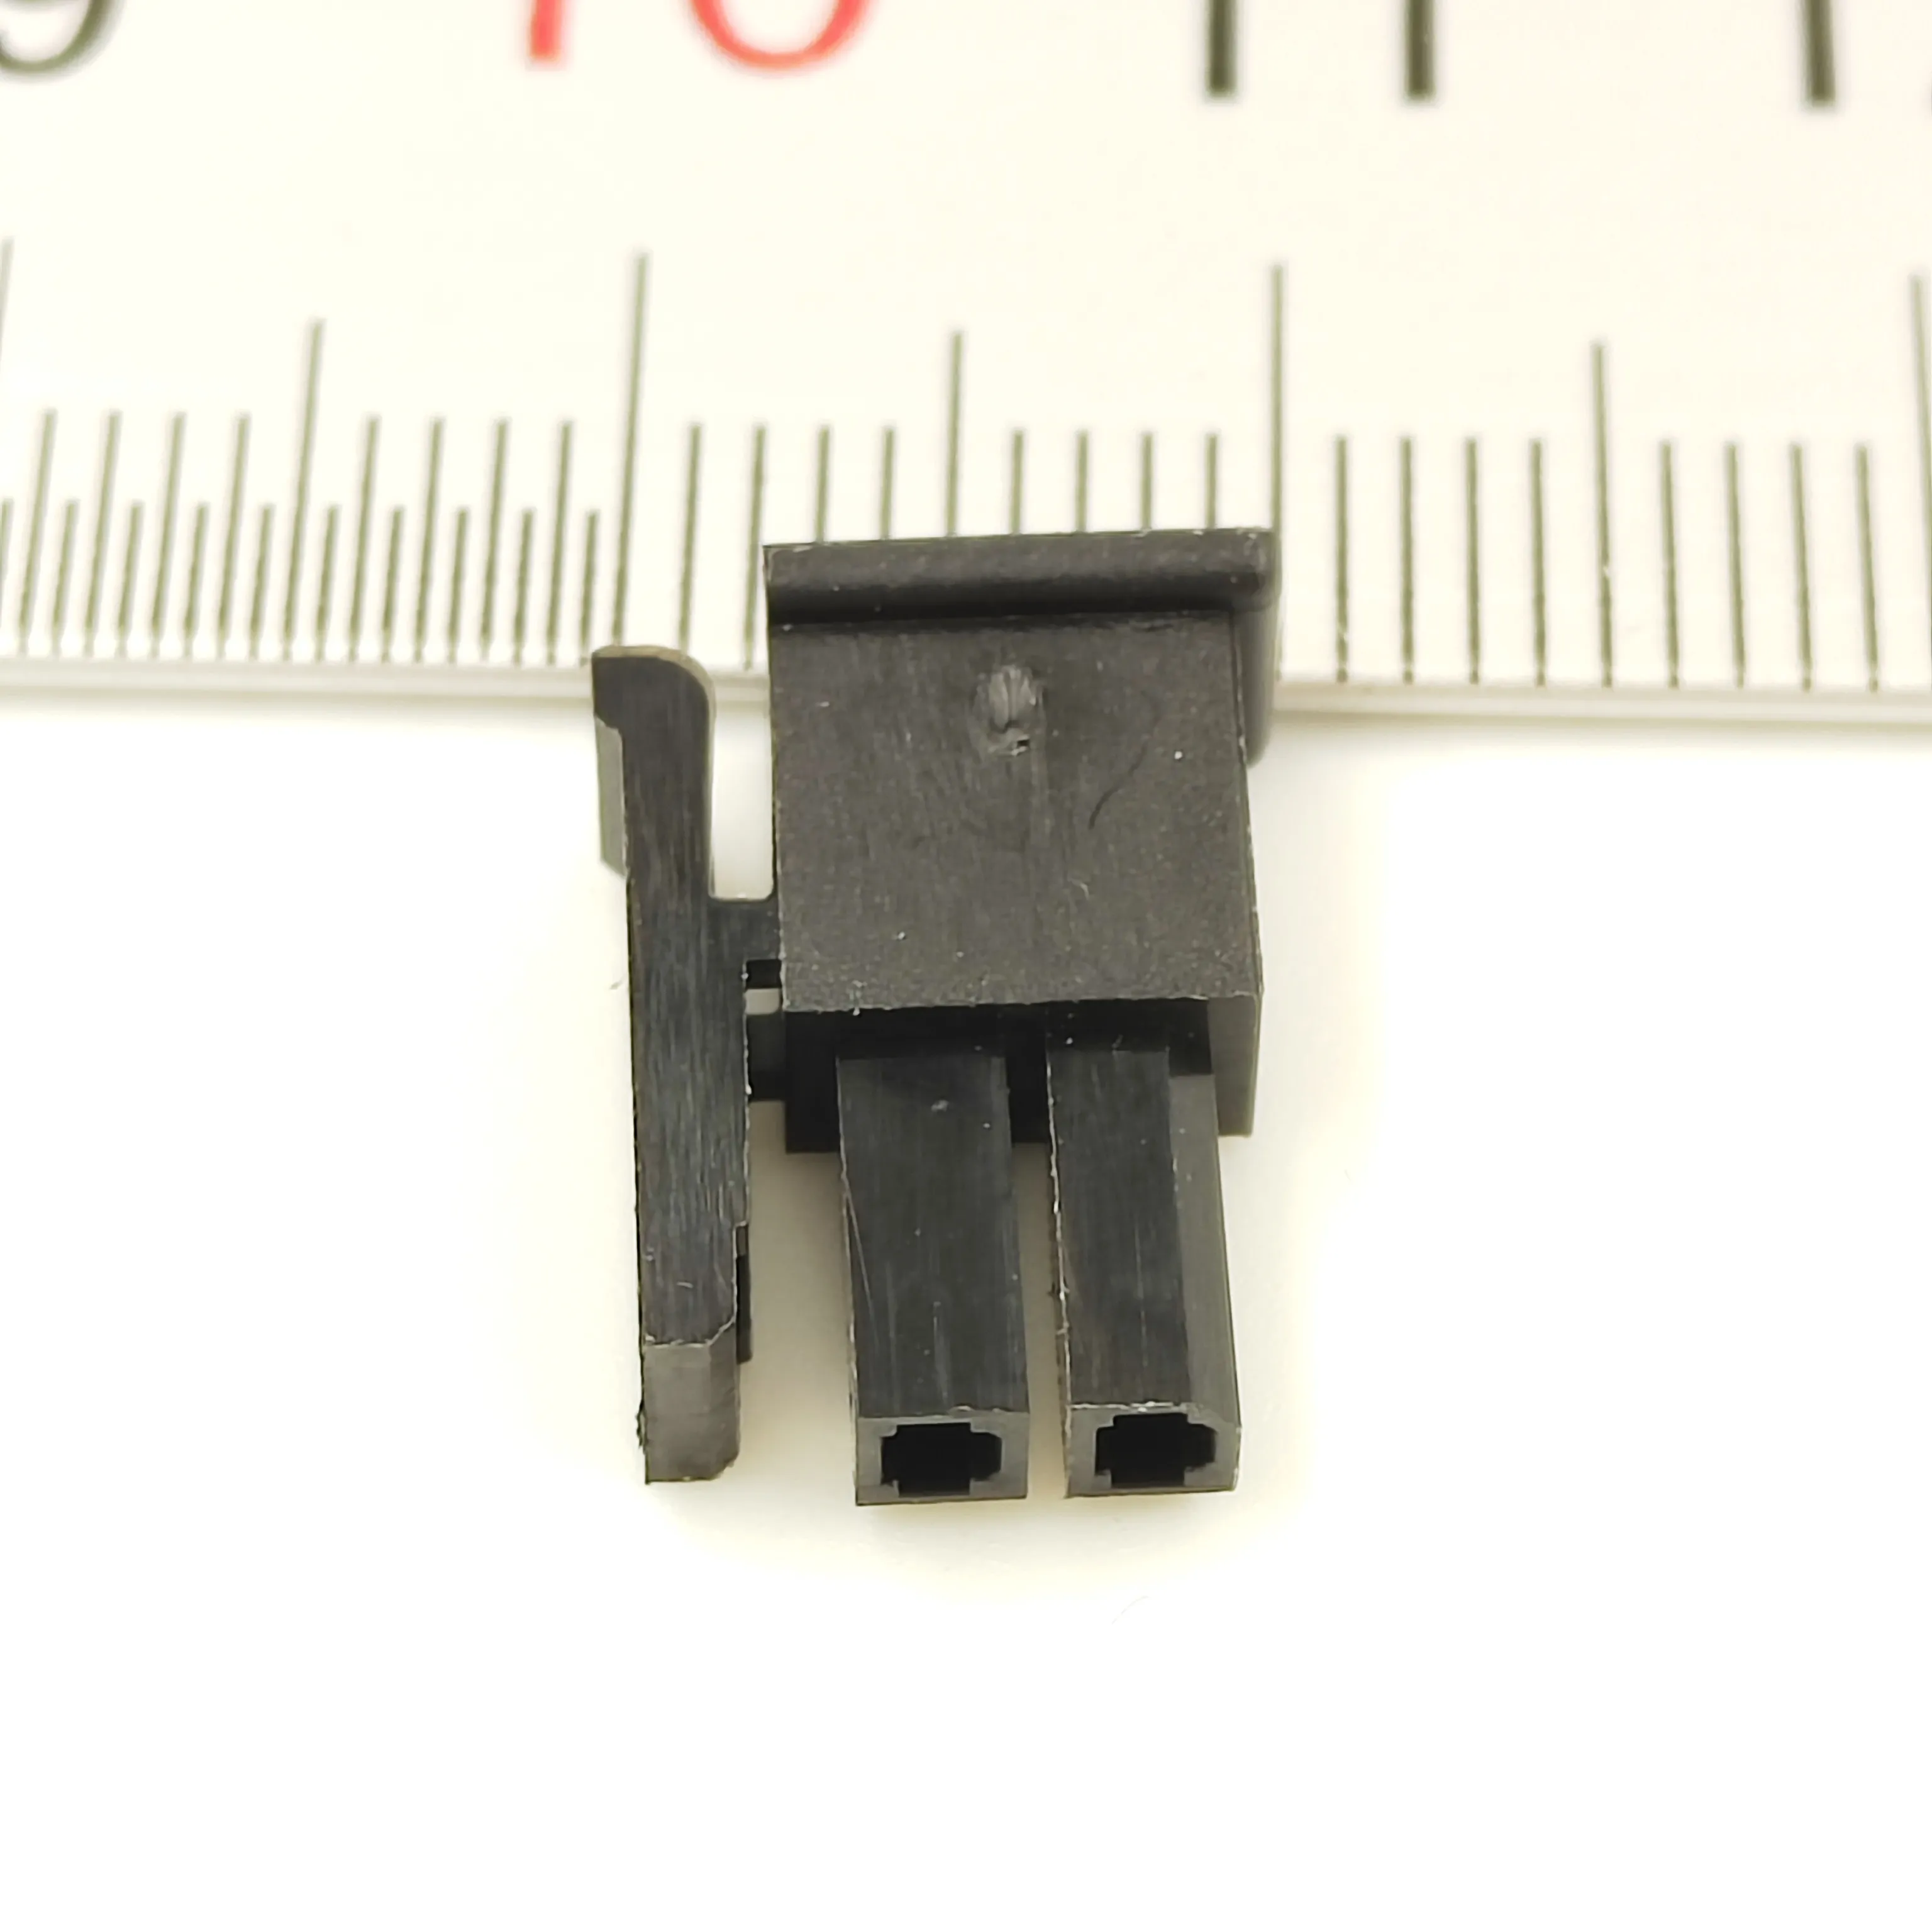 HOYATO Connector 2 3 4 5 6 7 8 9 10 11 12 Pin Single Row 3MM Male And Female Plastic Shell Through Hole Housing